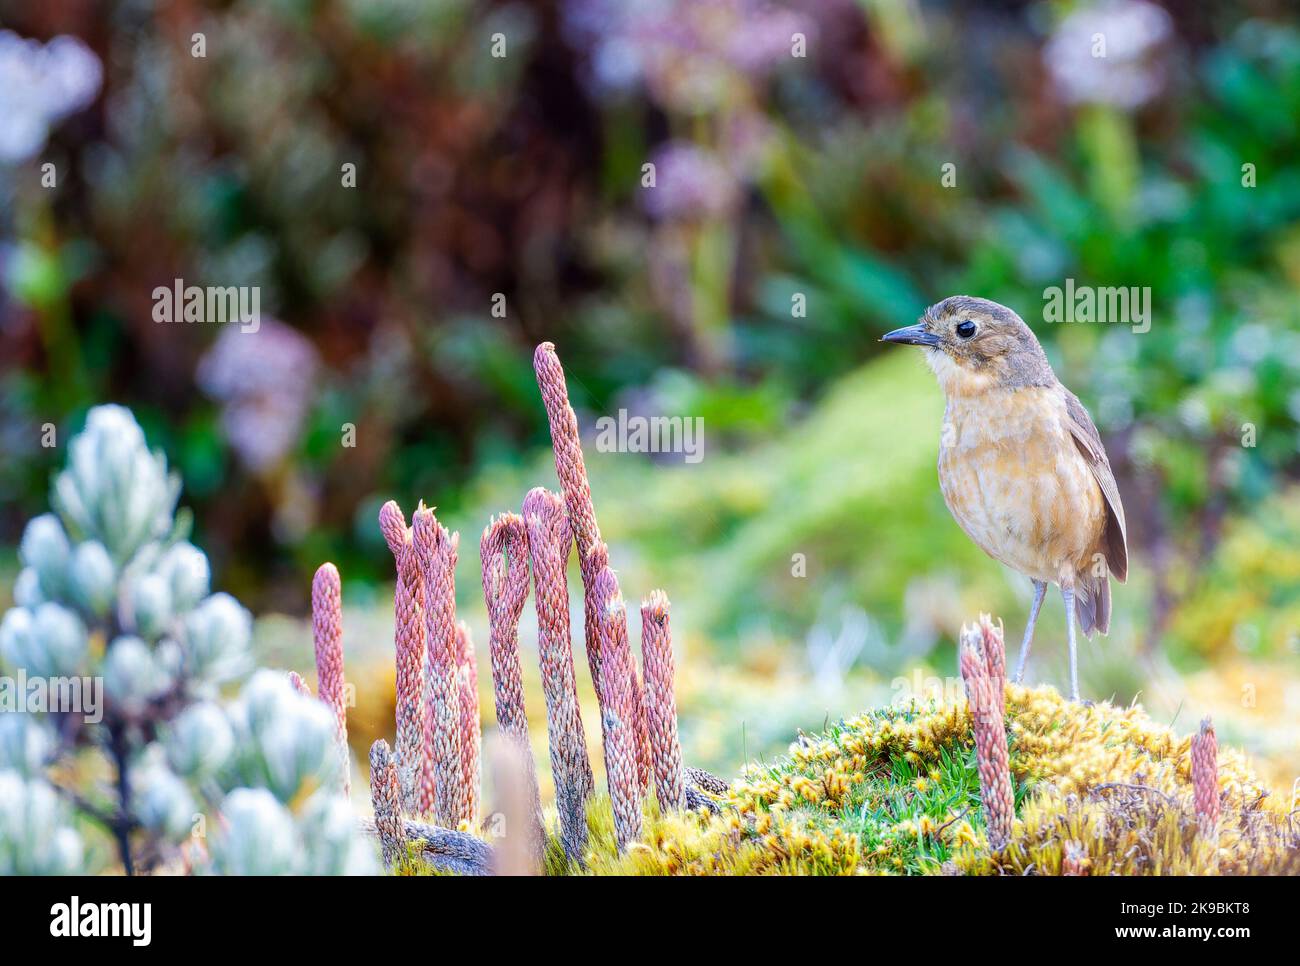 Tawny Antpitta (Grallaria quitensis quitensis) at Papallacta pass in Ecuador. Standing on the ground in paramo vegetation. Stock Photo